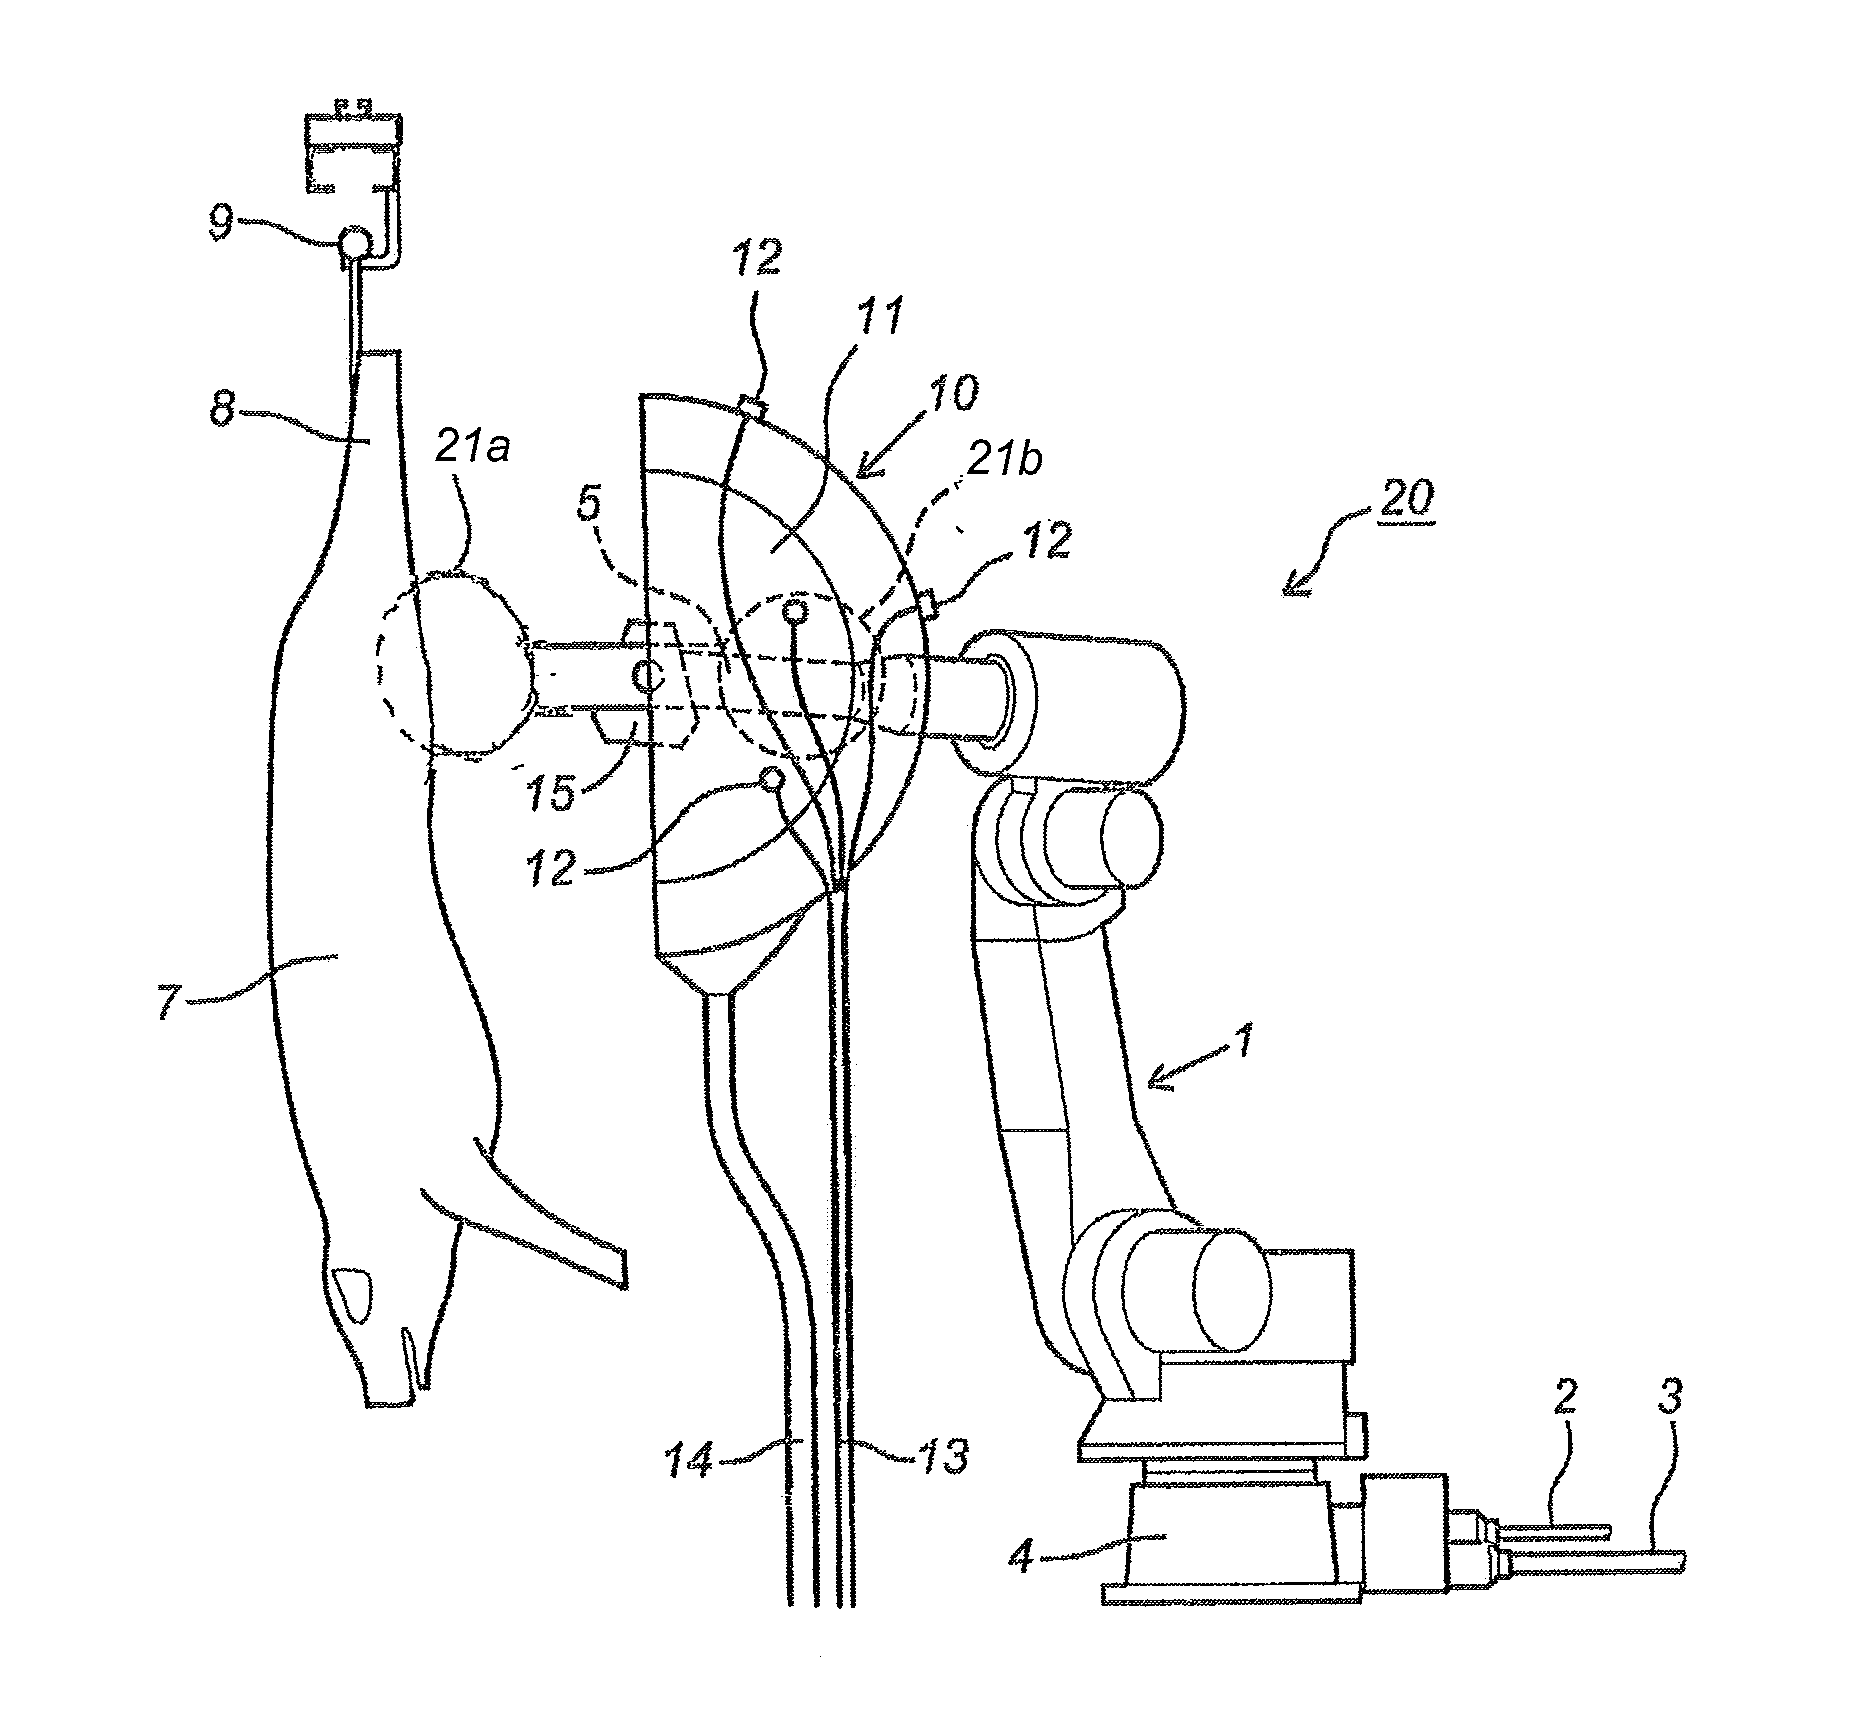 Device and Method for Processing Carcasses of Livestock